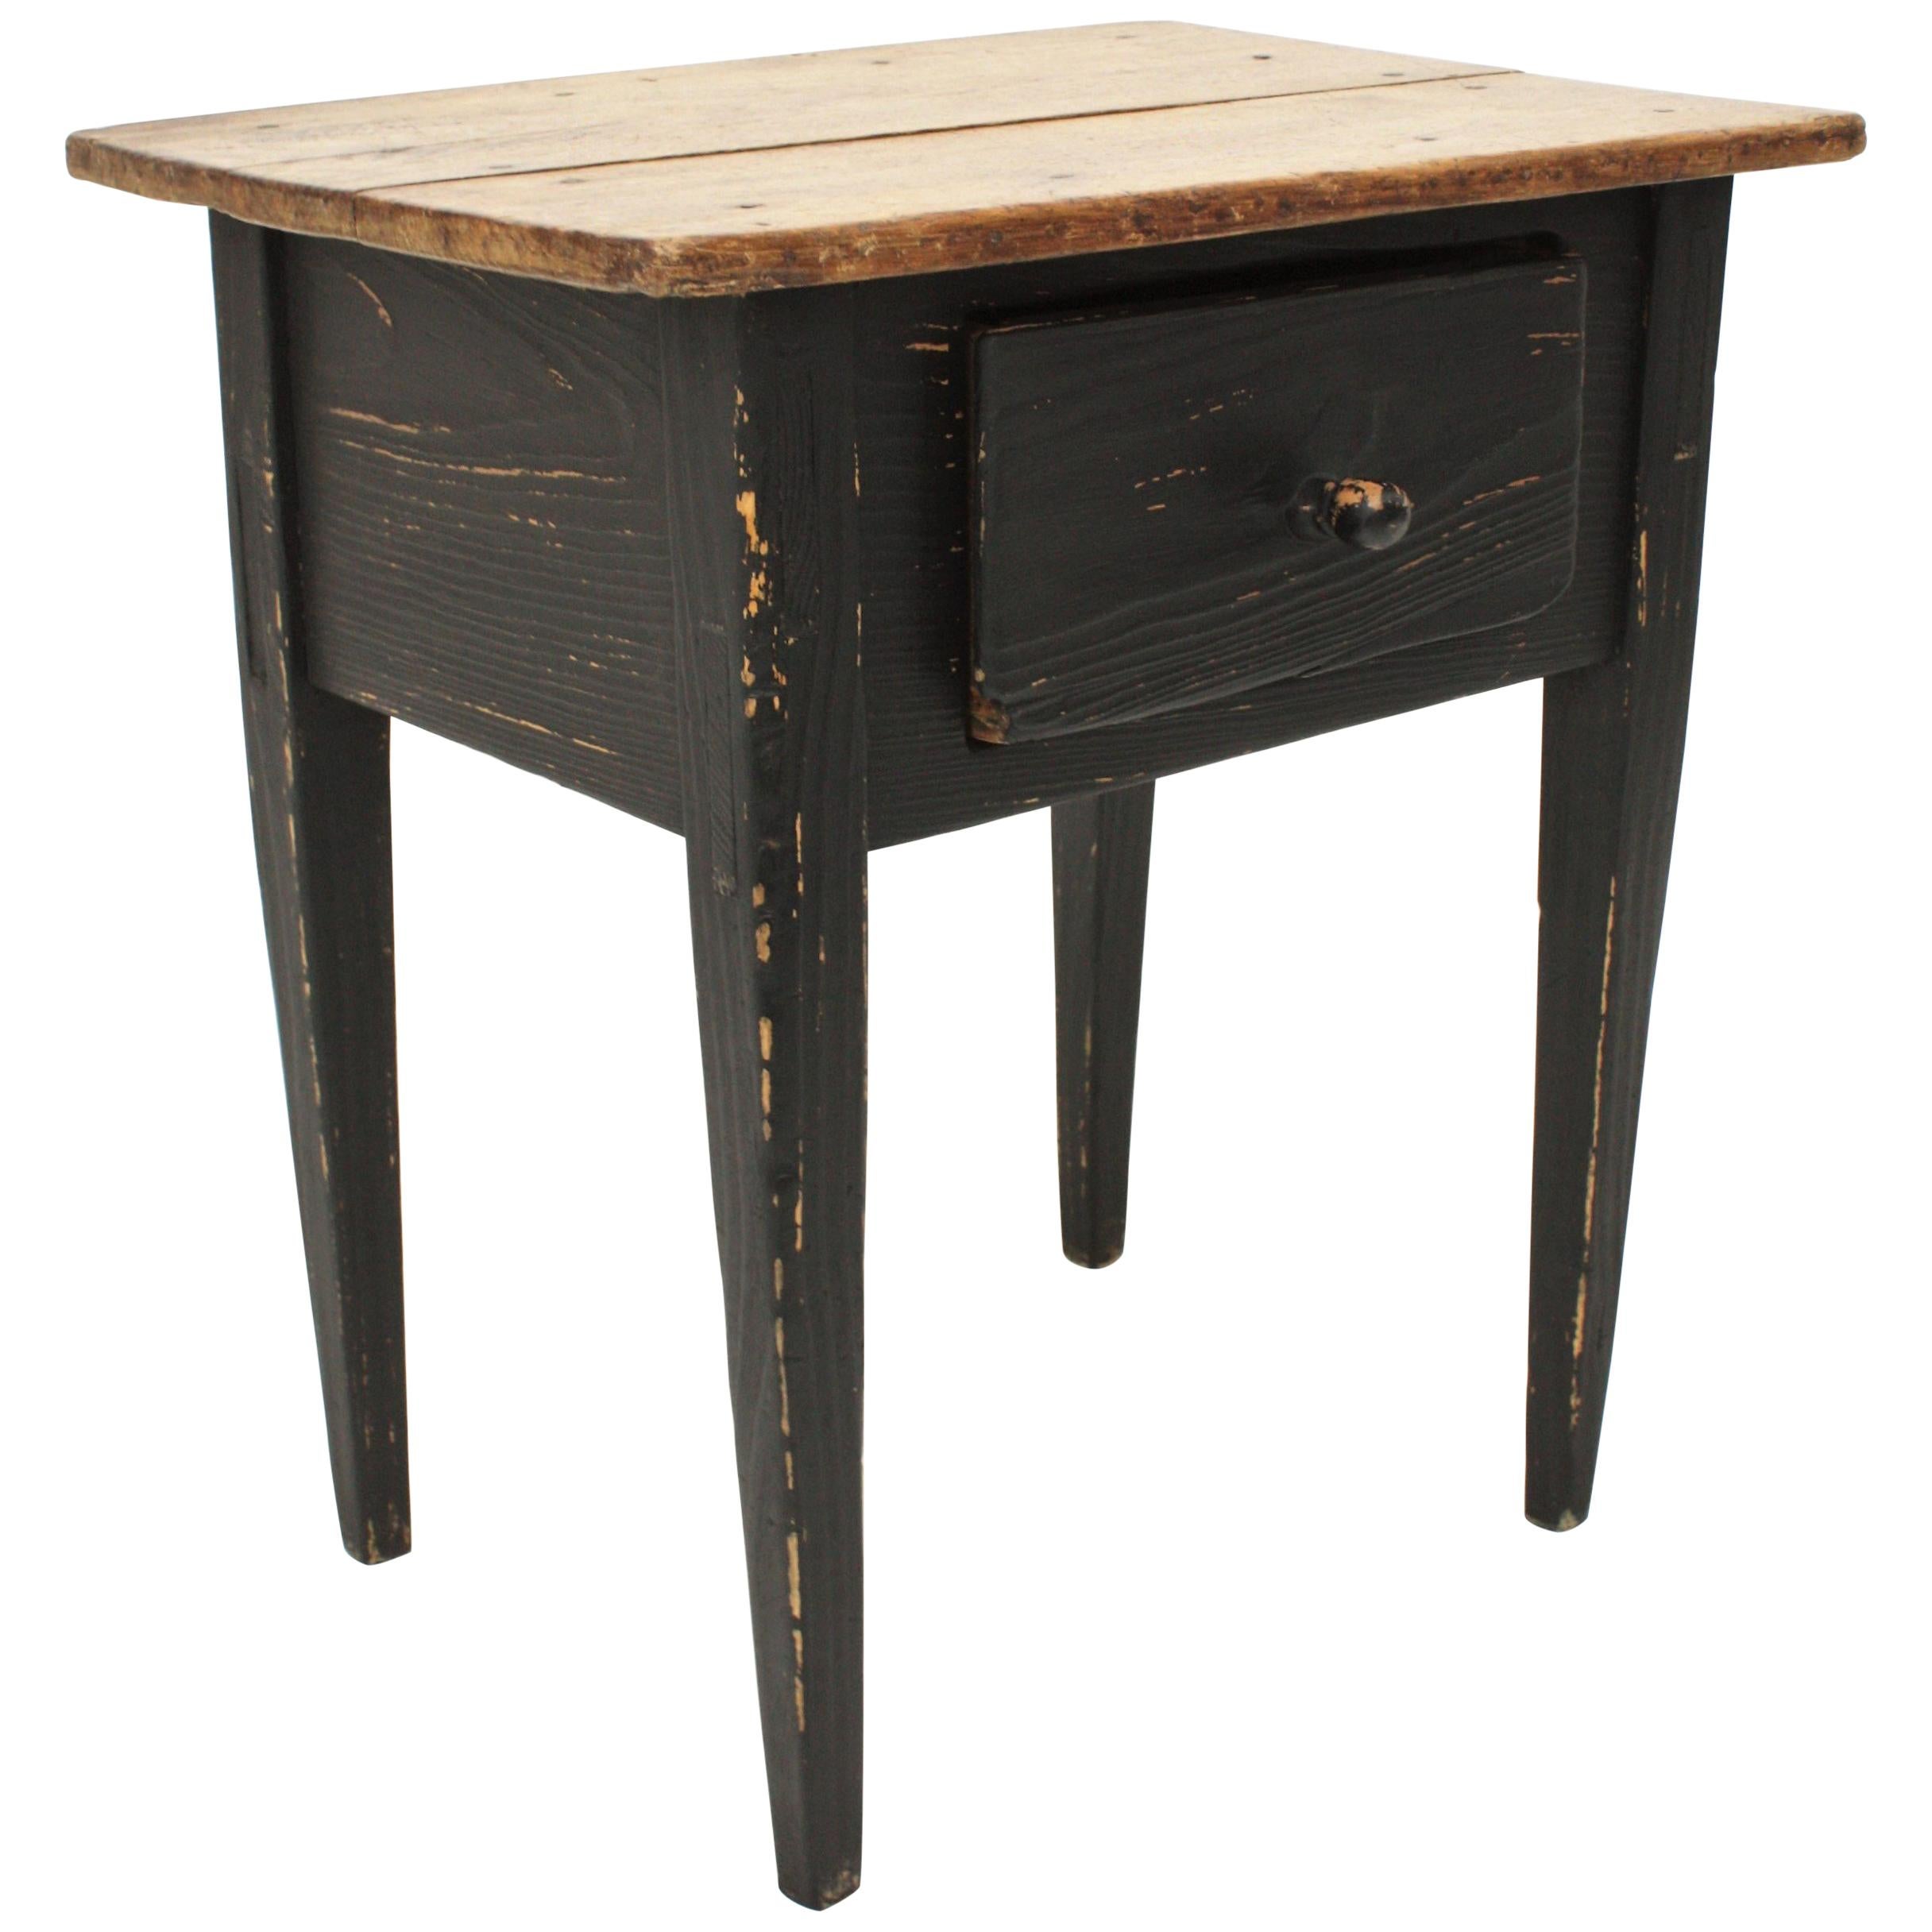 Painted Spanish Single Drawer Rustic Table in Black Patina